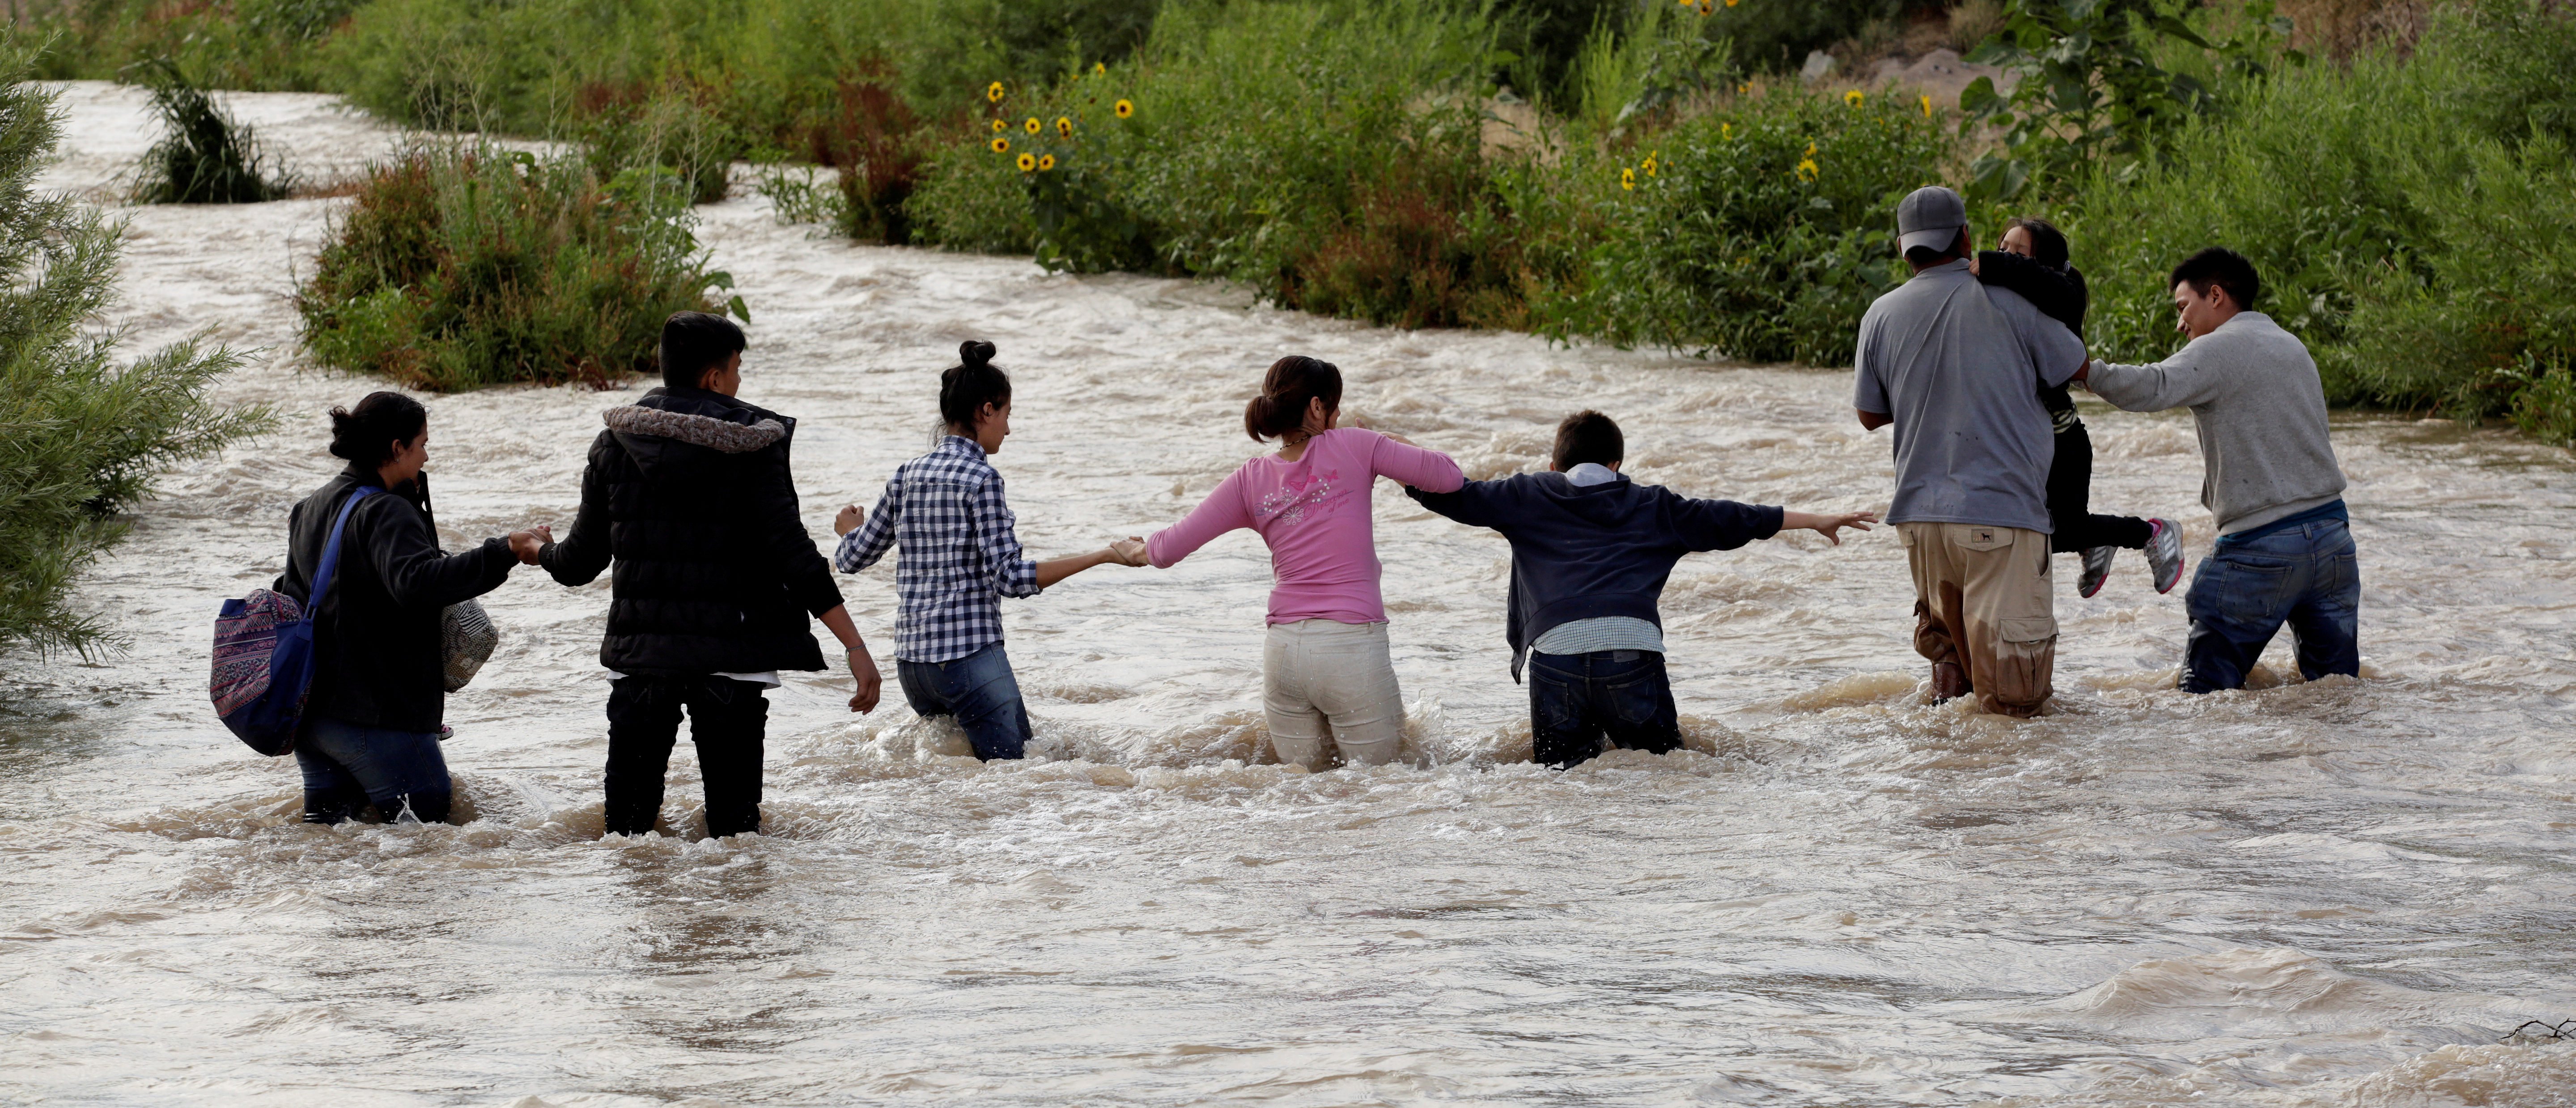 FILE PHOTO: Migrants from Central America form a human chain to cross the Rio Bravo river to enter illegally into the United States to turn themselves in to request for asylum in El Paso, Texas, U.S., as seen from Ciudad Juarez, Mexico June 11, 2019. Picture taken June 11, 2019. REUTERS/Jose Luis Gonzalez